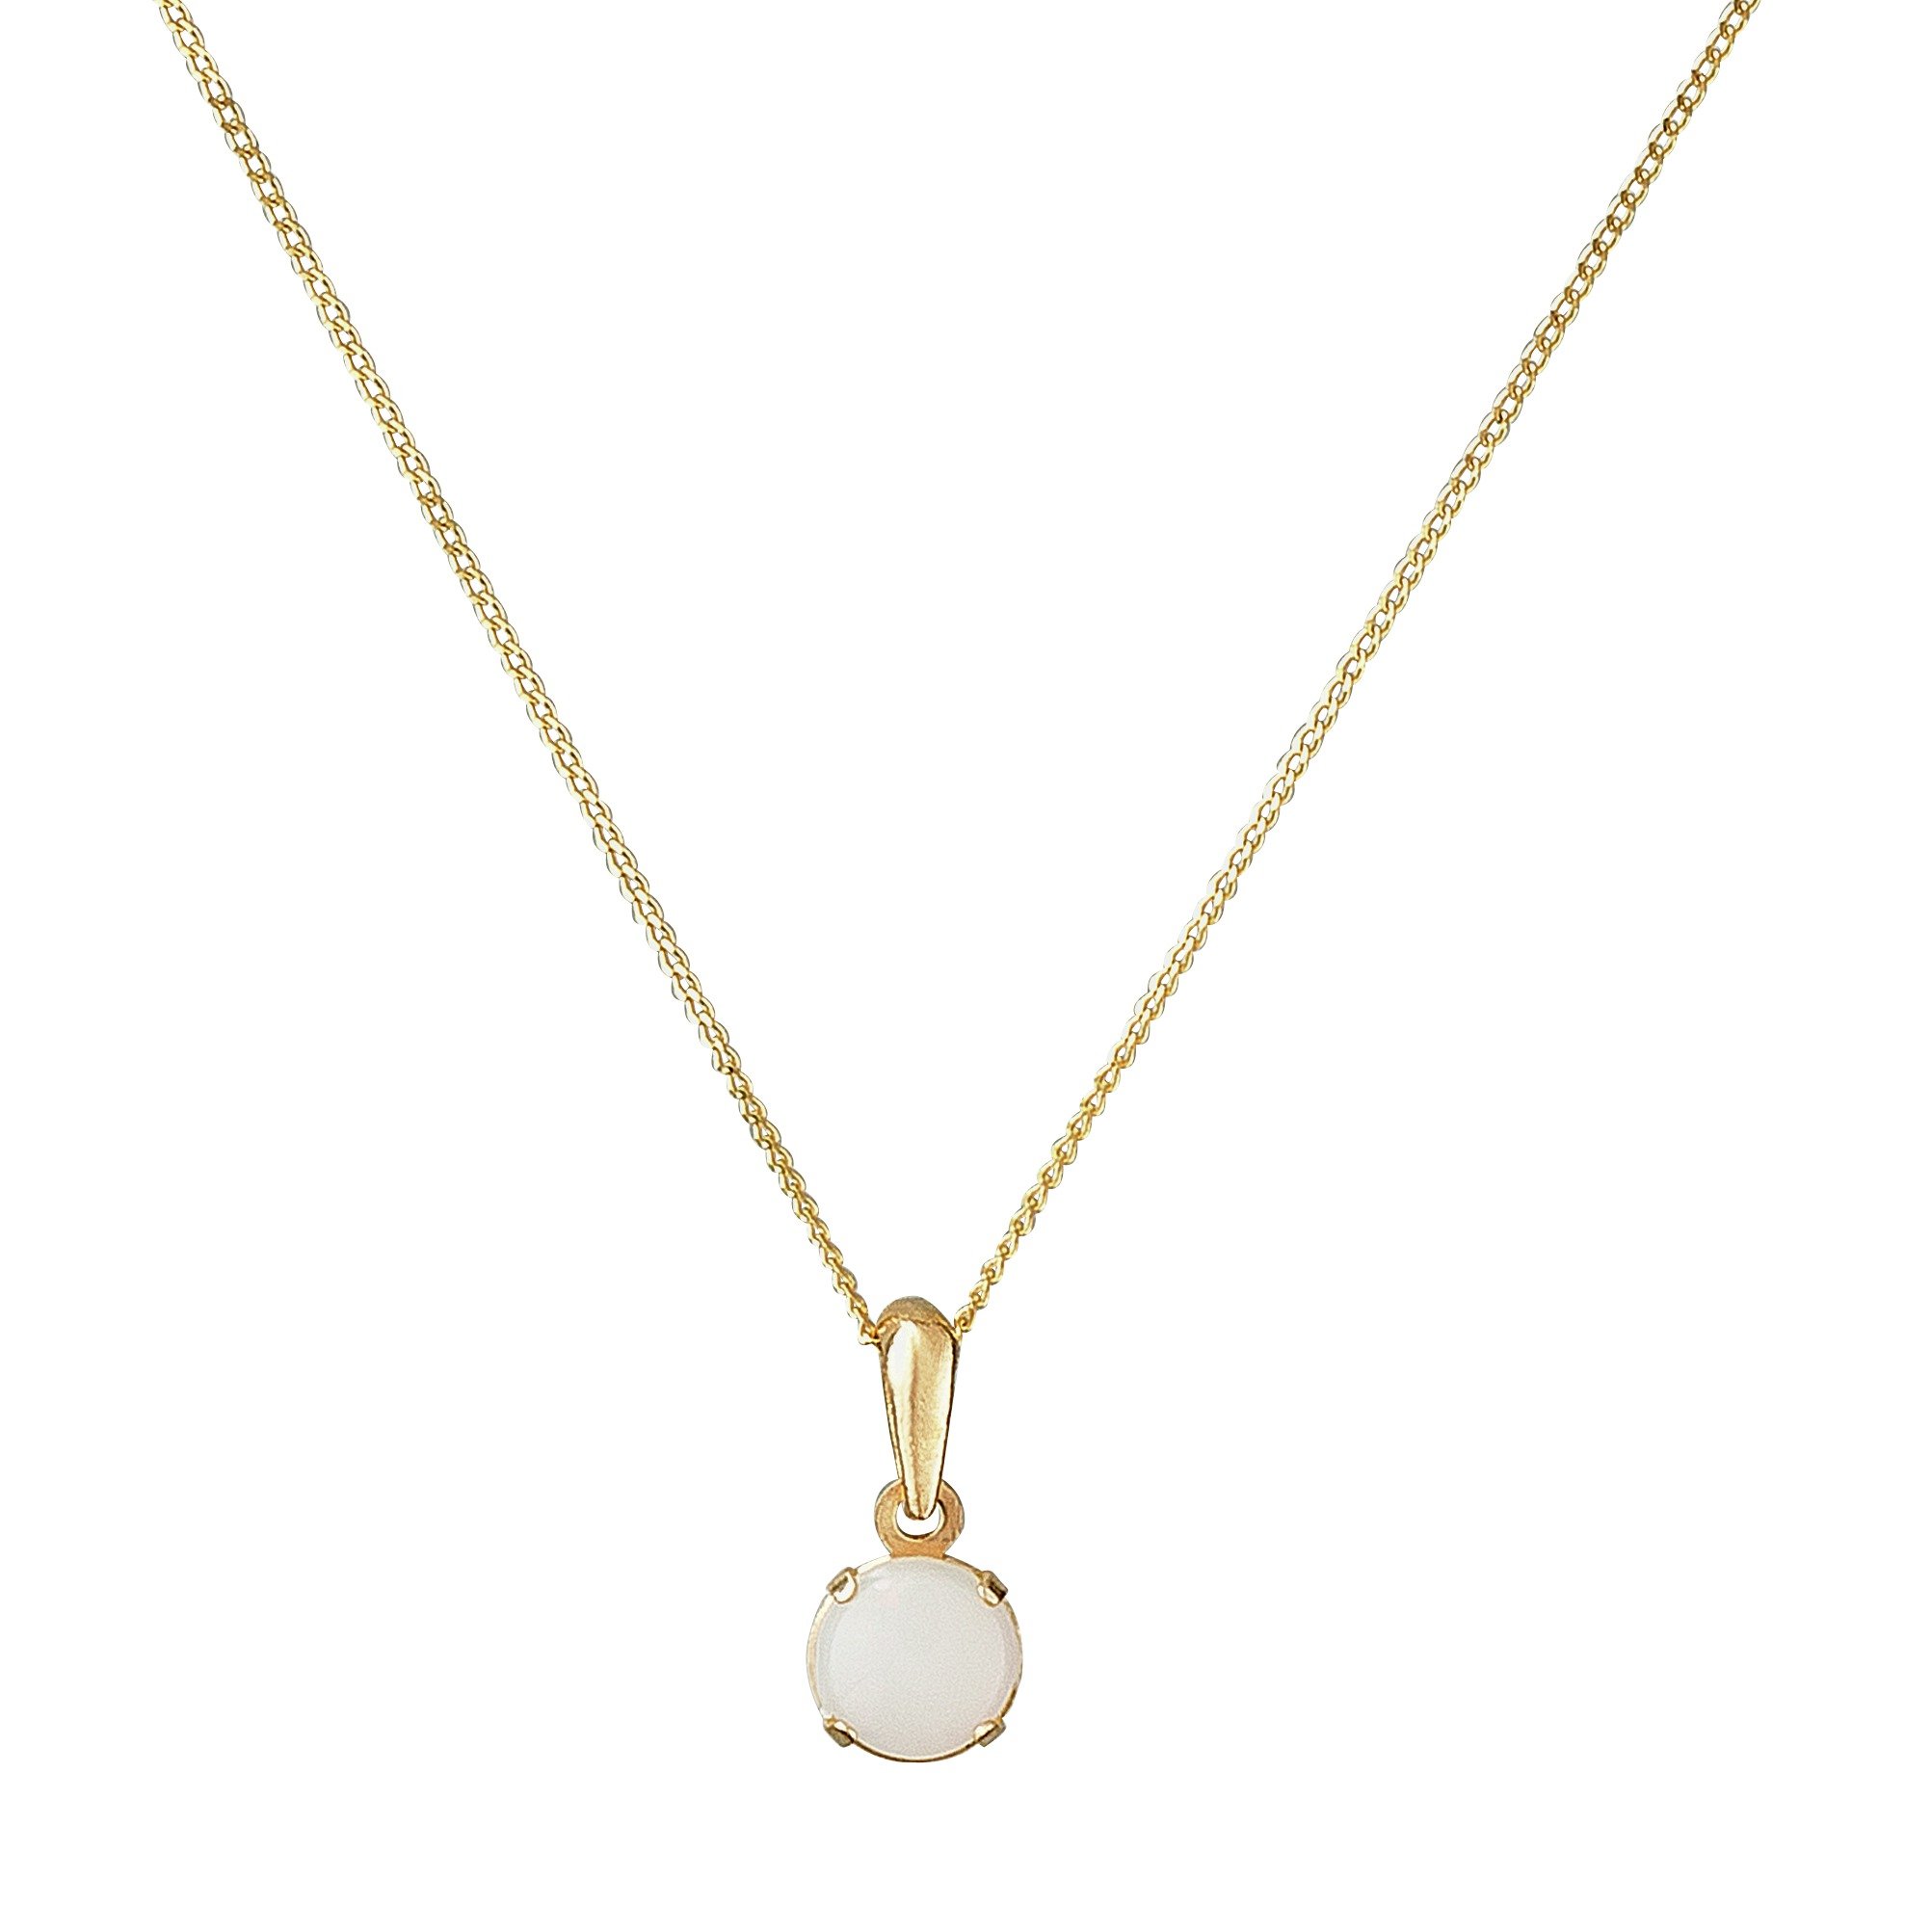 Revere 9ct Gold Opal 5mm Pendant Necklace - October